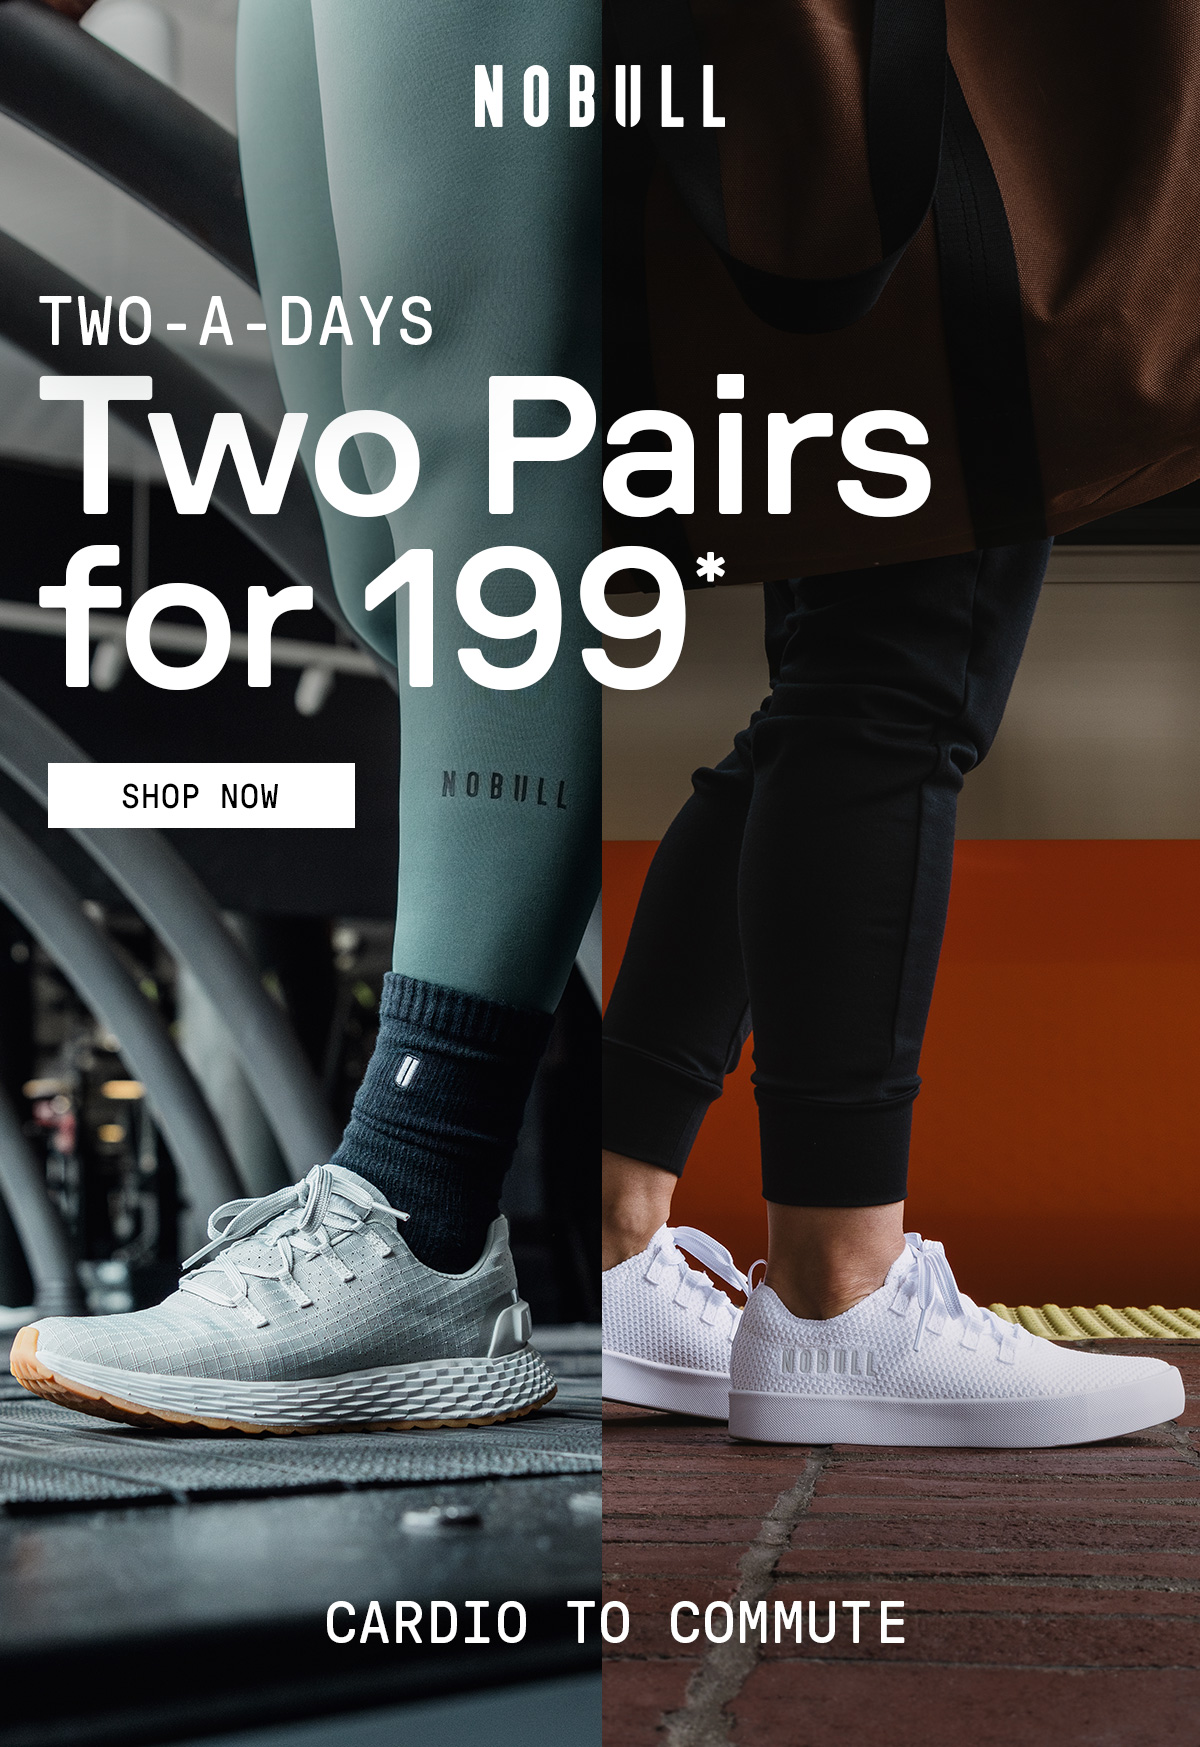 MIX AND MATCH ANY TWO PAIRS FOR $199